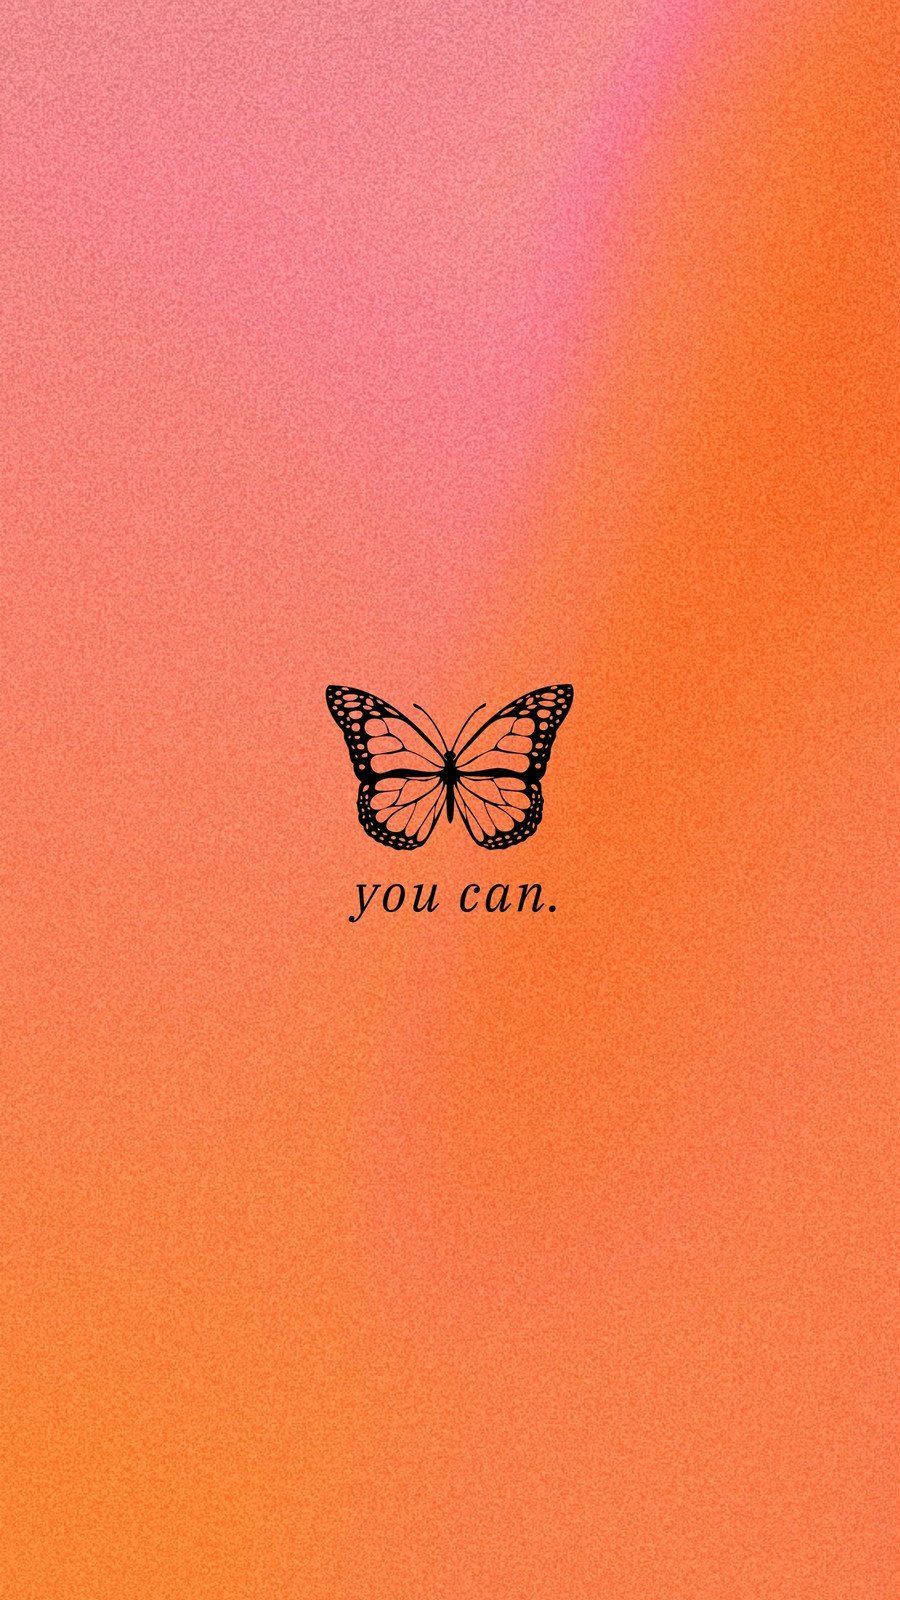 Aesthetic butterfly wallpaper phone background with the quote 